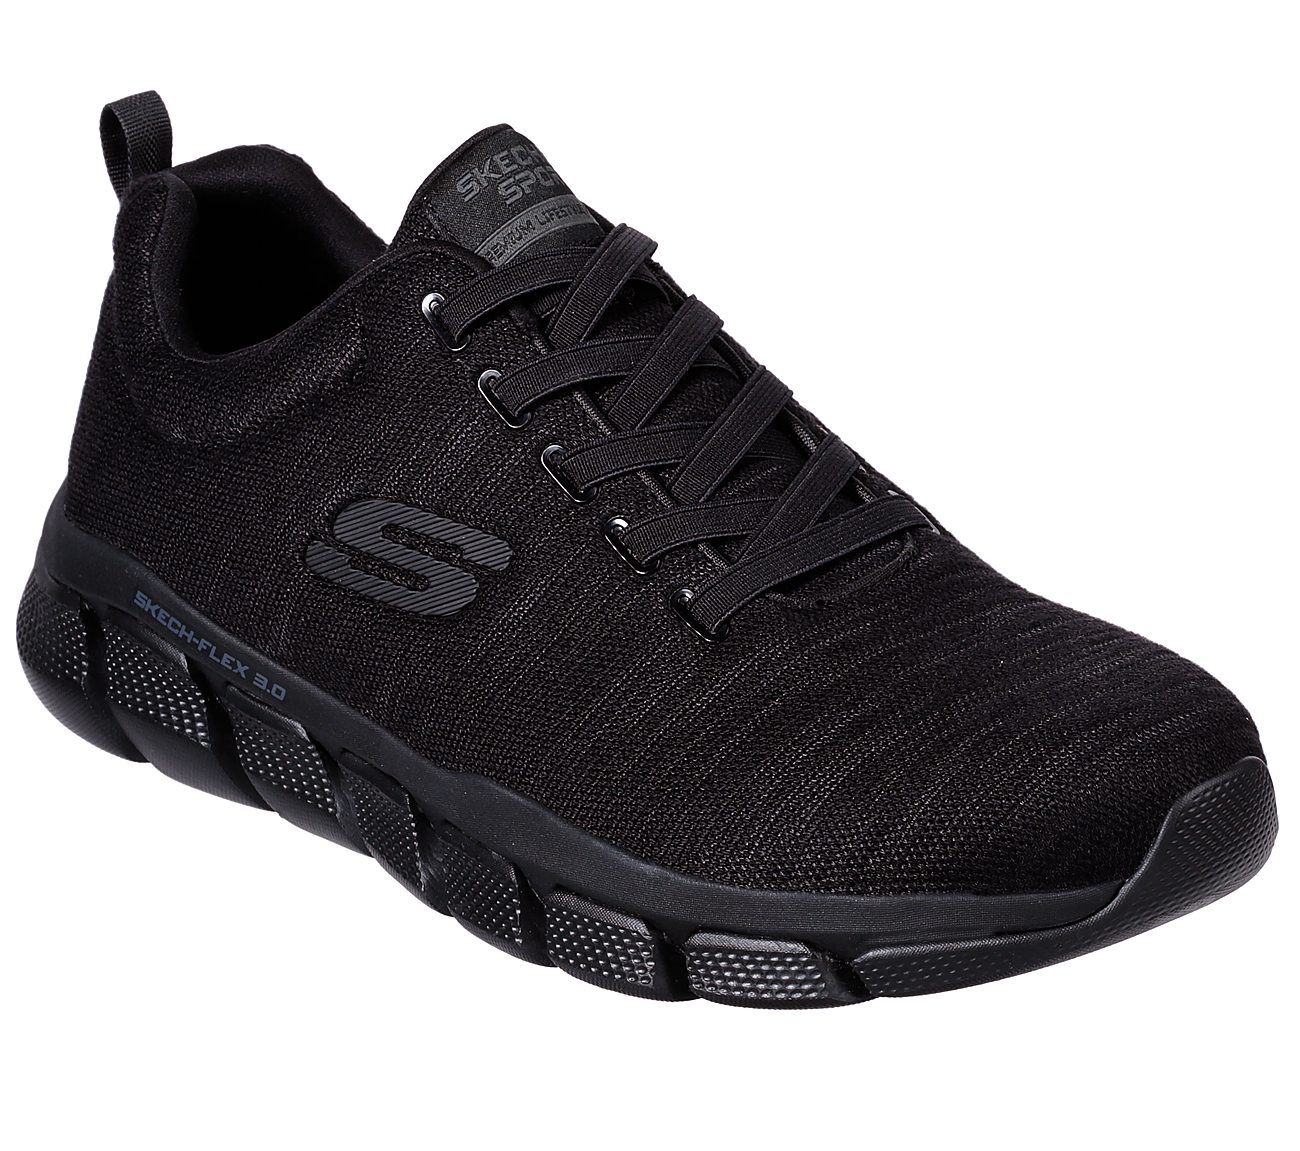 Buy SKECHERS Relaxed Fit: Skech-Flex 3.0 - Strongkeep Sport Shoes